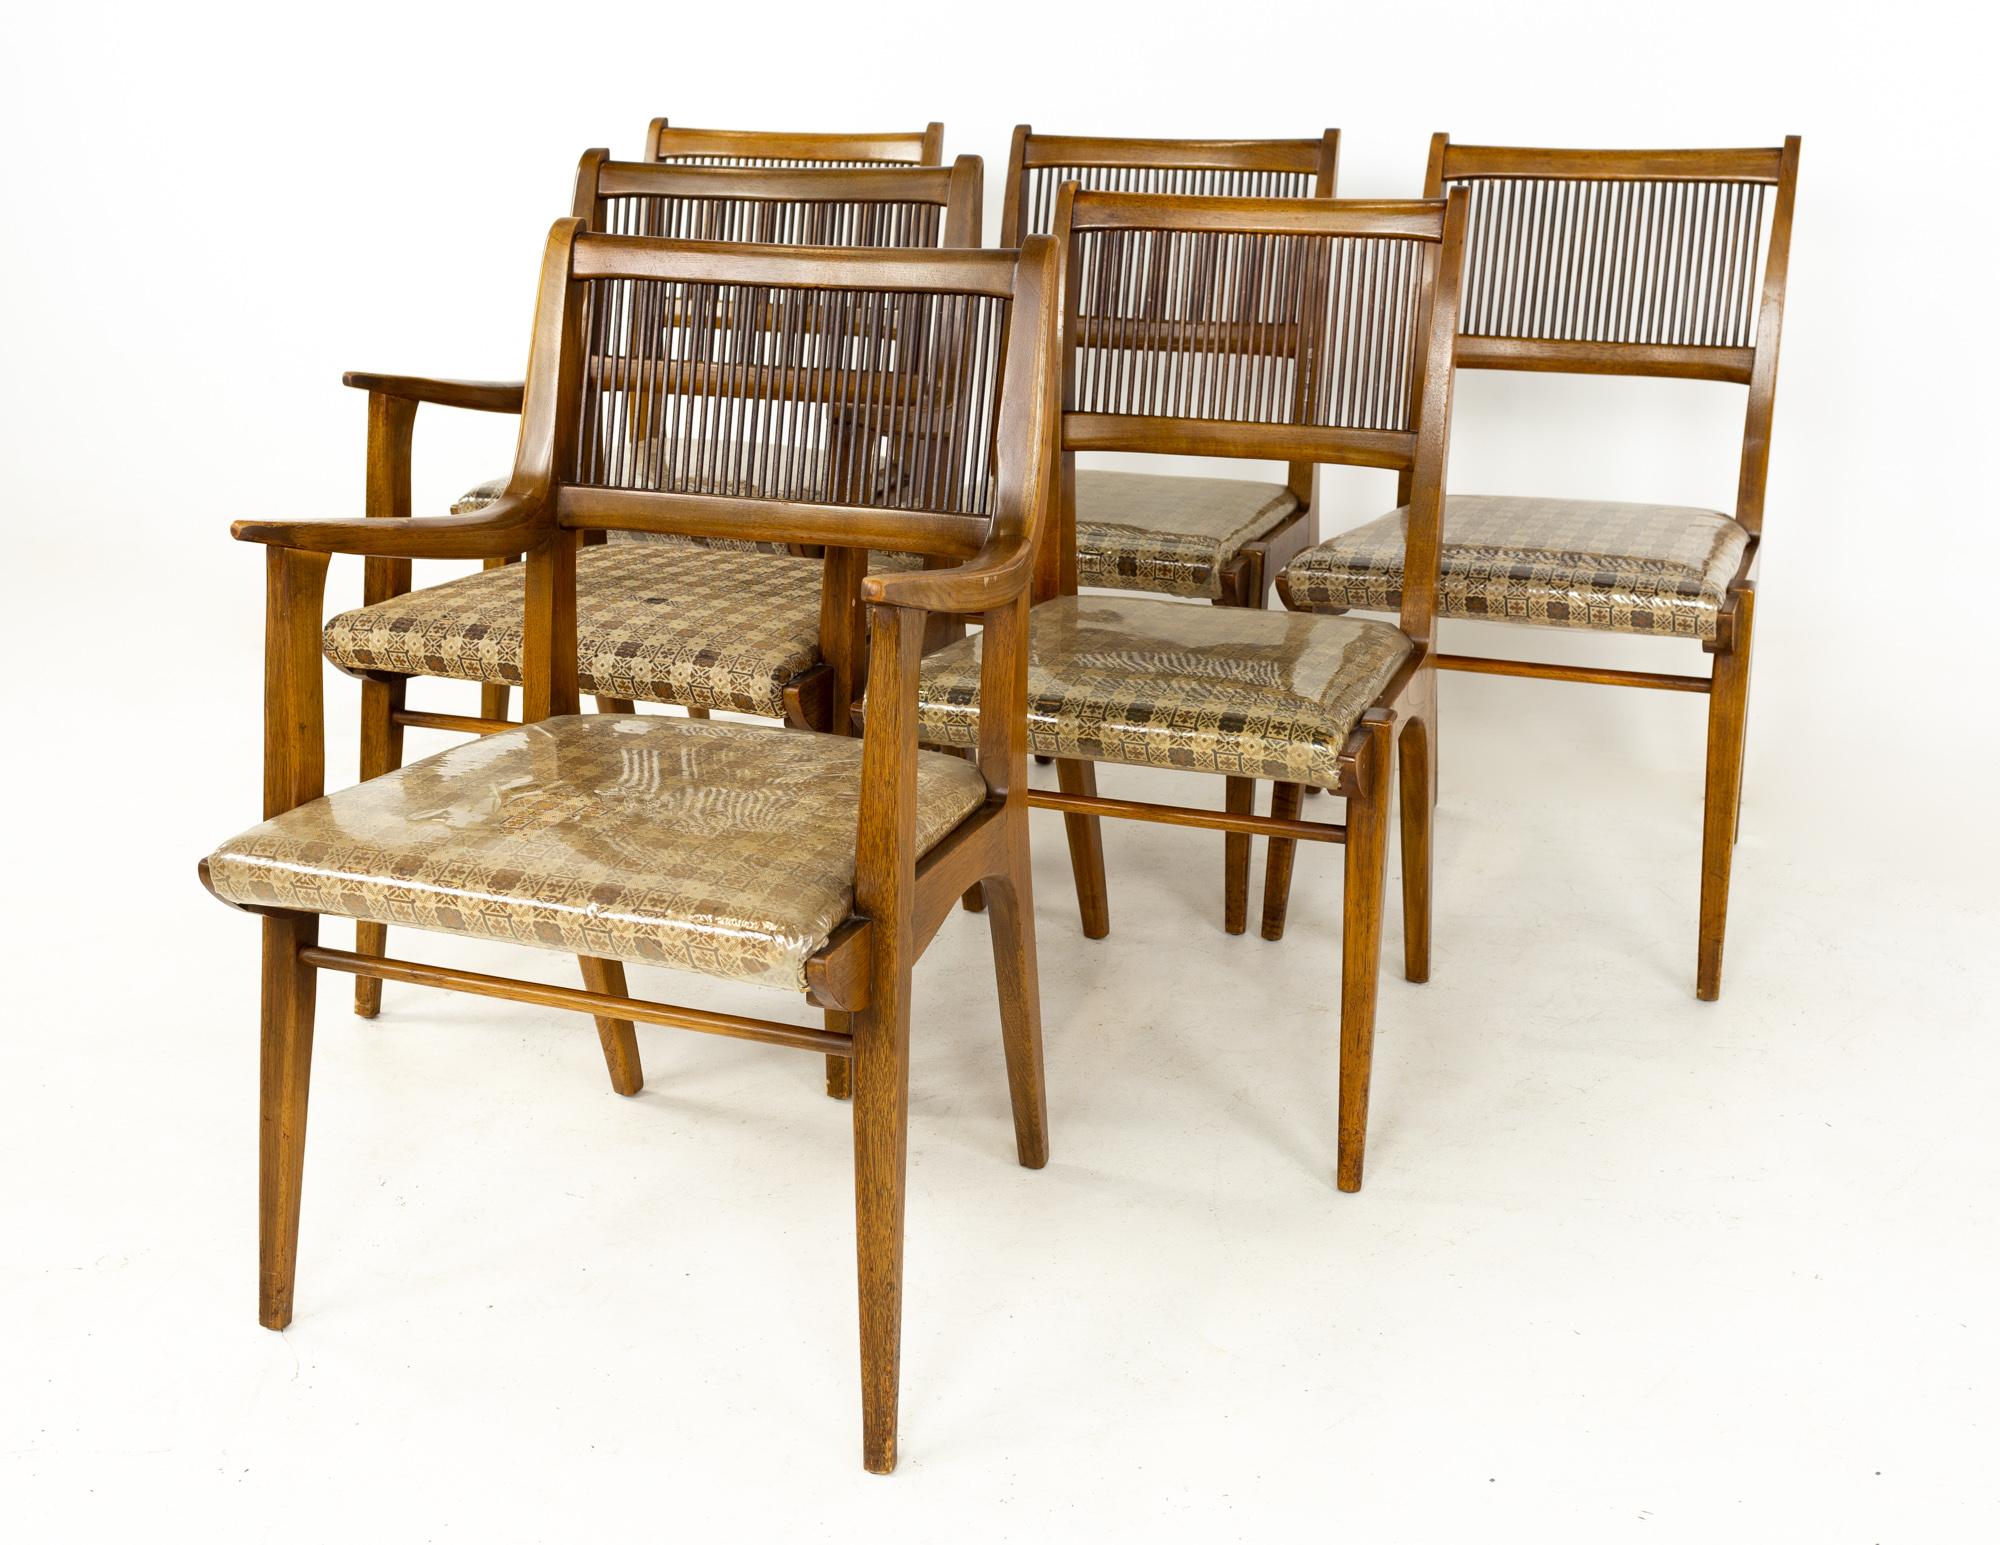 John Van Koert for Drexel mid century profile dining chairs - Set of 6
Each chair measures: 22.5 wide x 20.5 deep x 35.25 inches high, with a seat height of 18.75 and arm height of 28.25 (also the chair clearance)

All pieces of furniture can be